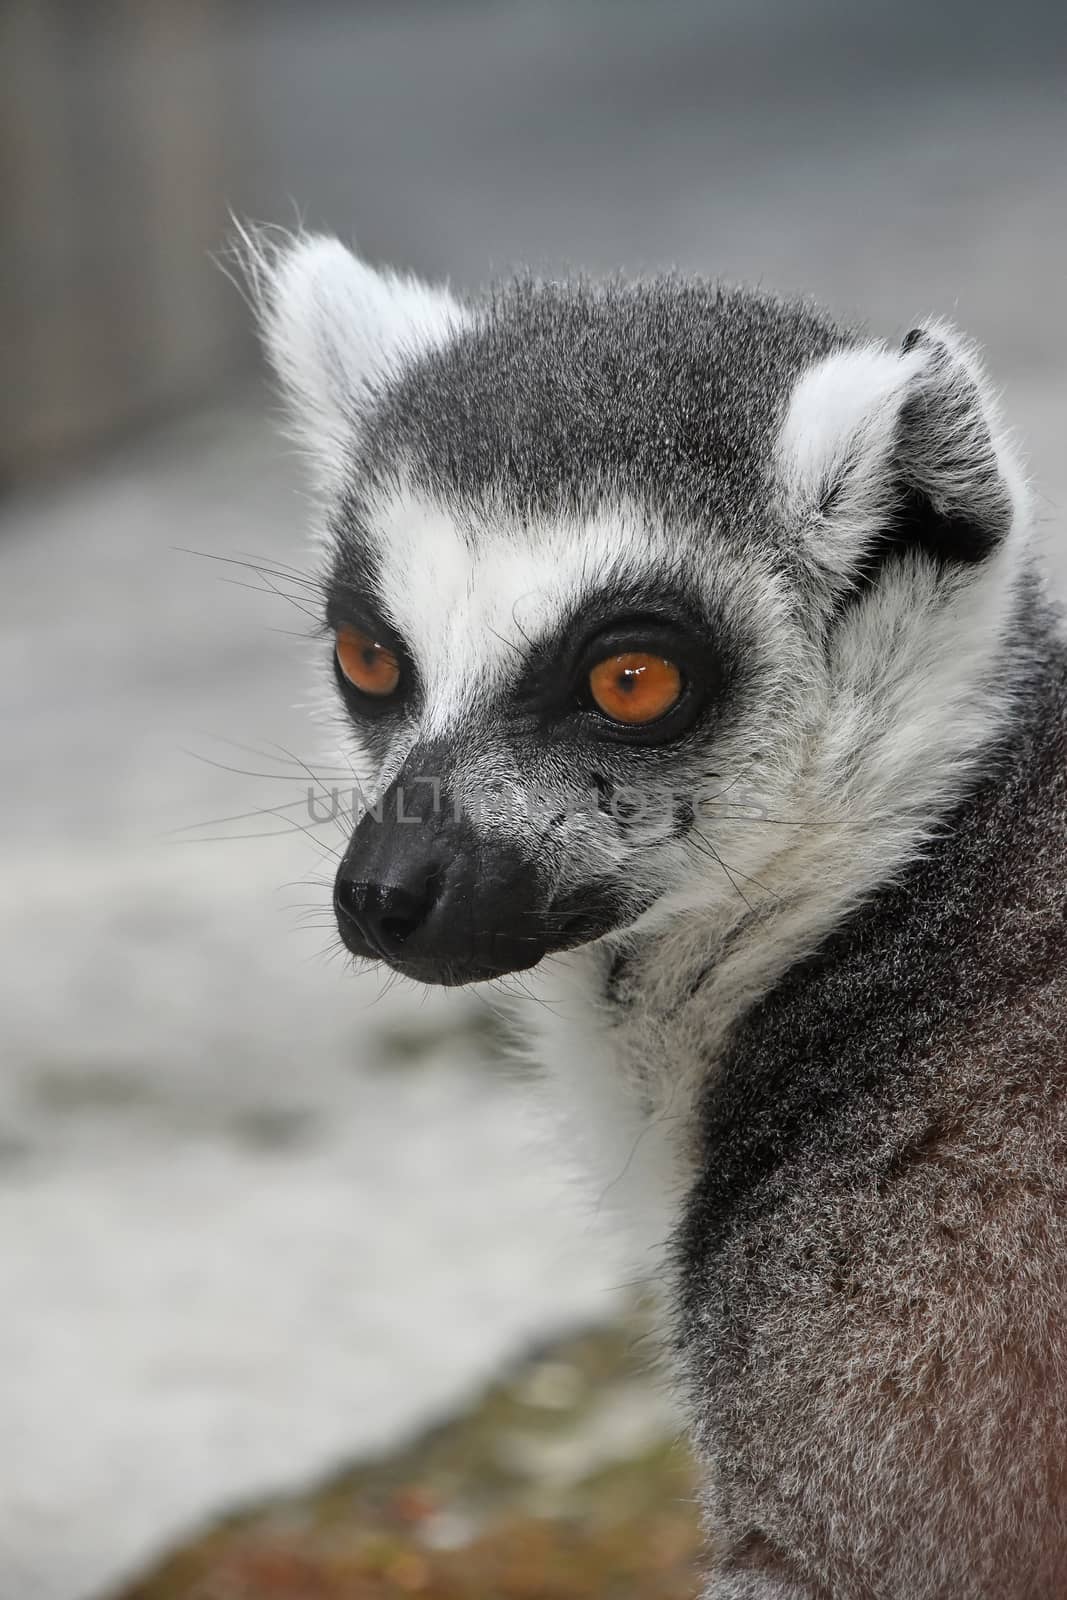 Close up portrait of one cute ring-tailed lemur (aka lemur catta, maky or Madagascar cat) in zoo, looking aside